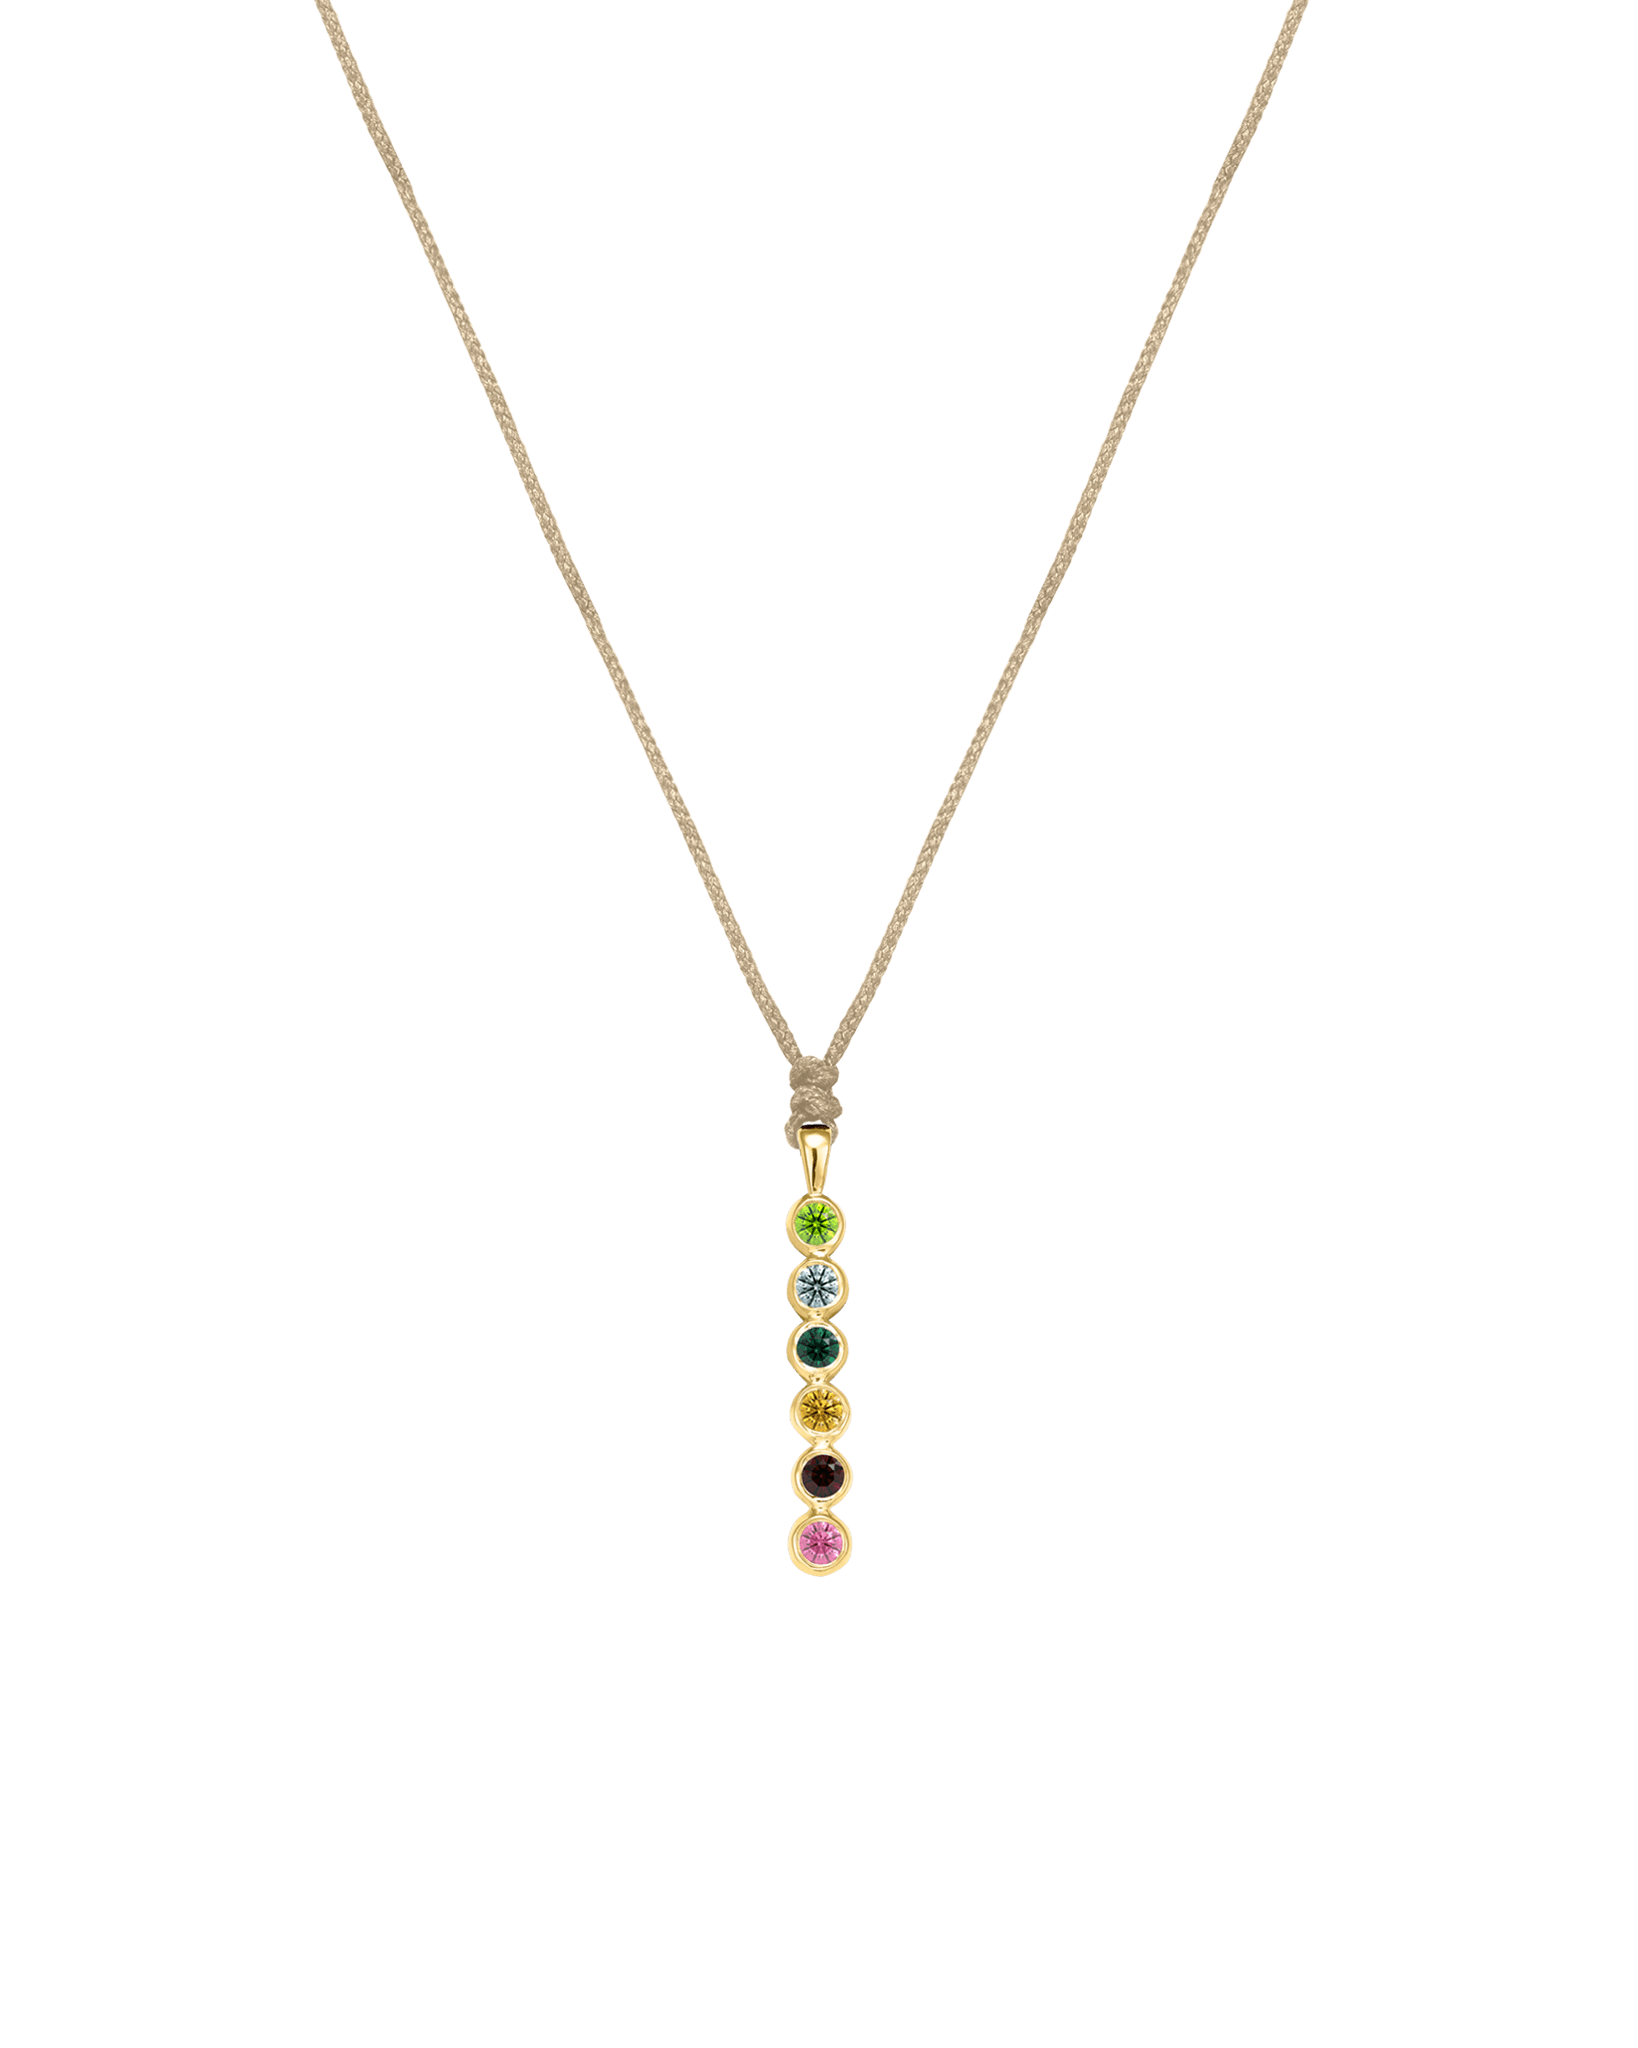 The Birthstones Bar Necklace - 14K Yellow Gold Necklaces 14K Solid Gold Sand 2 